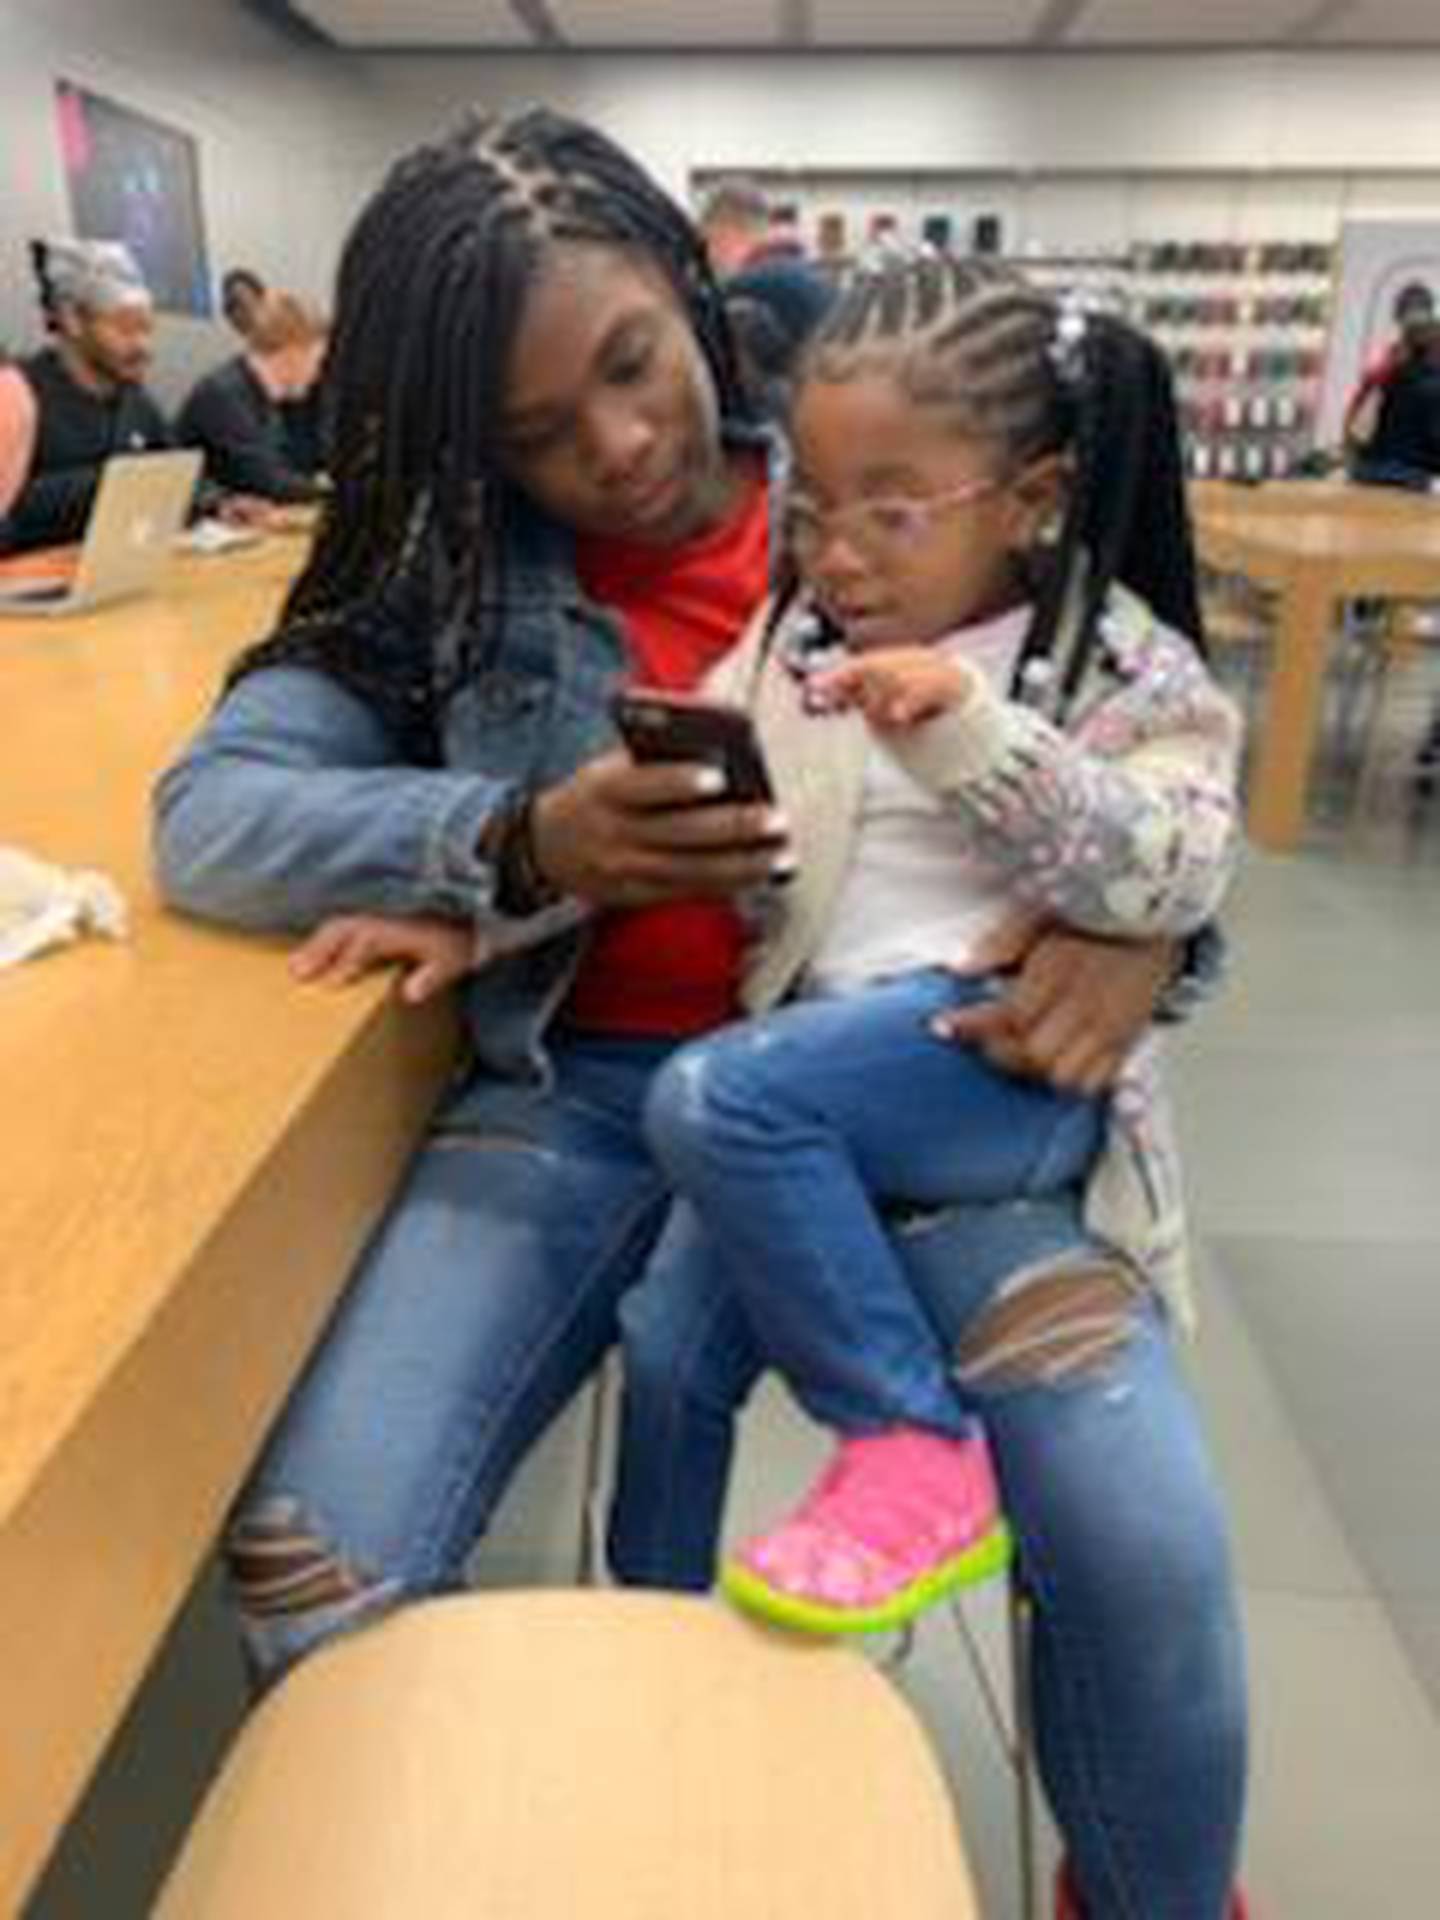 Dykota Morgan, 15, of Bolingbrook was an athlete, artist, activist and scholar. She died of complications from COVID-19 on May 4. She loved to braid the hair of her 5-year-old sister Layla.